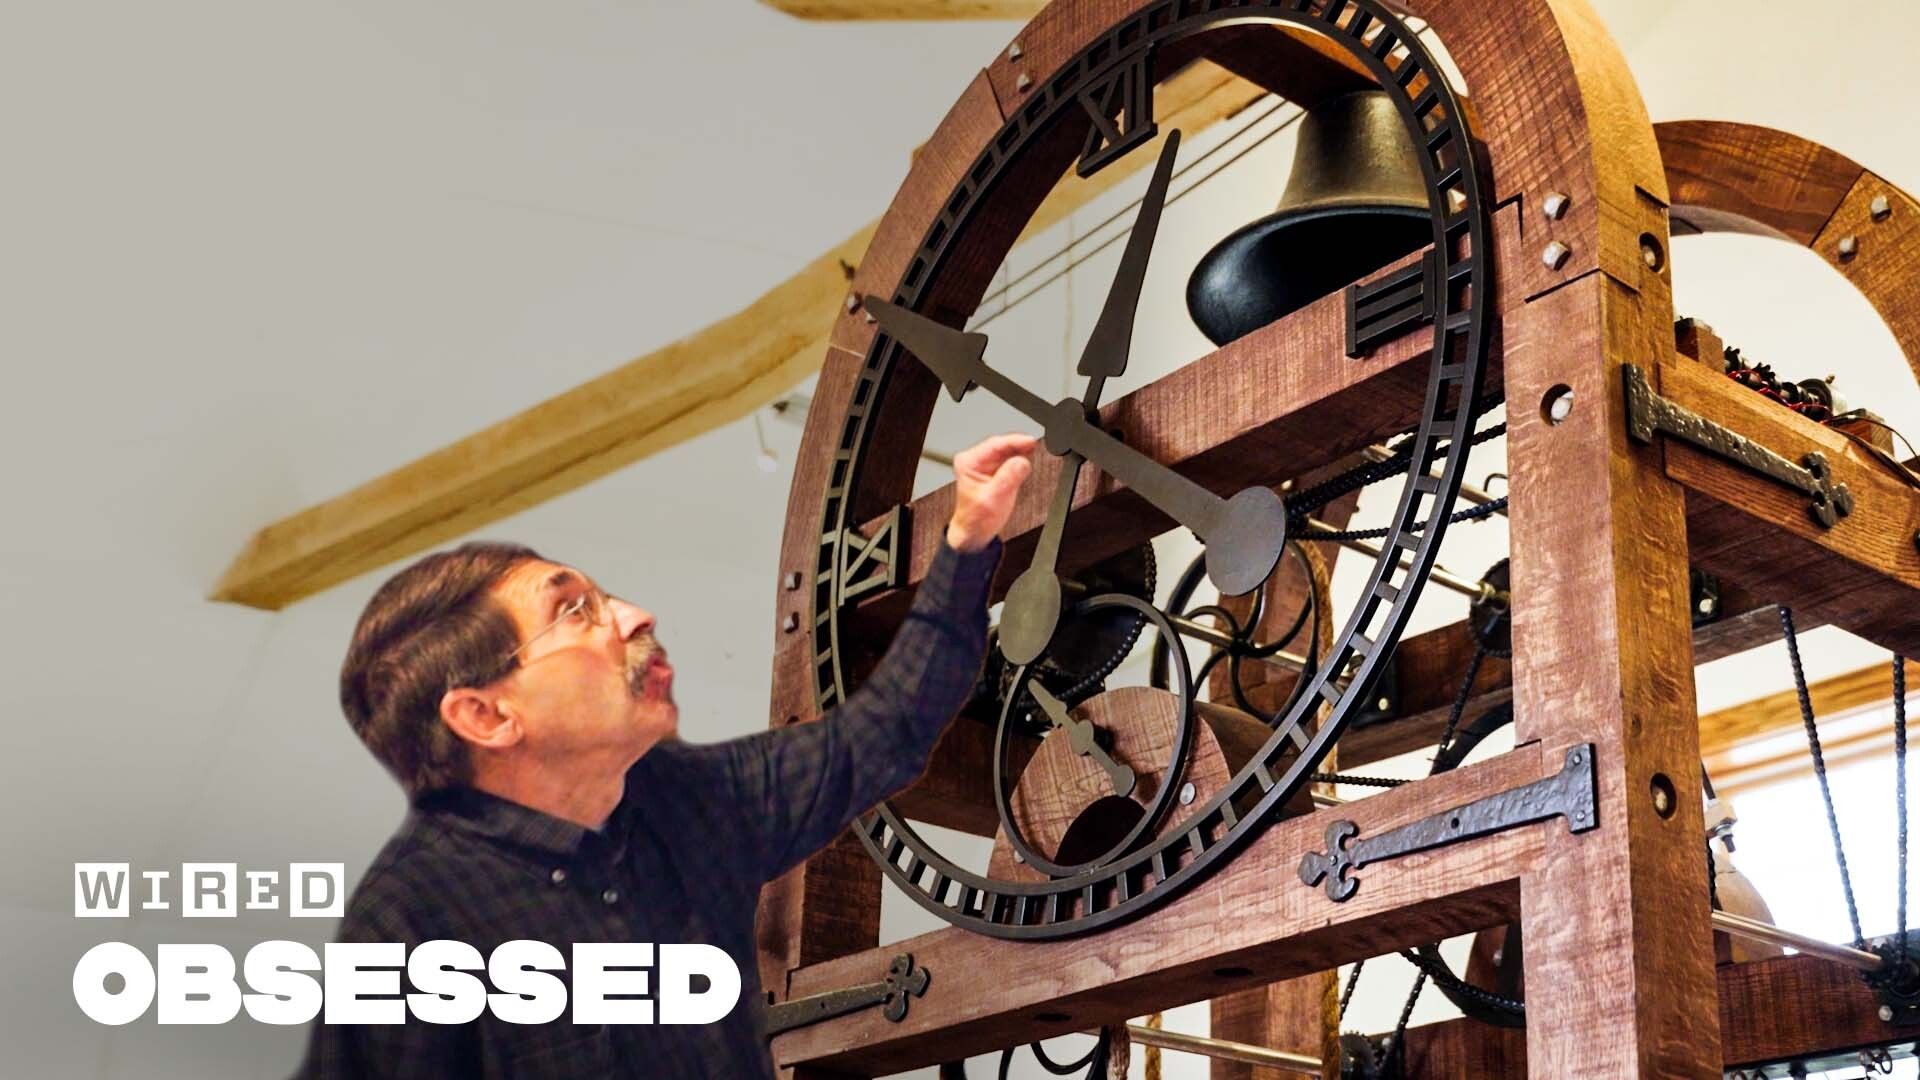 How This Guy Builds Mesmerizing Kinetic Sculptures, Obsessed